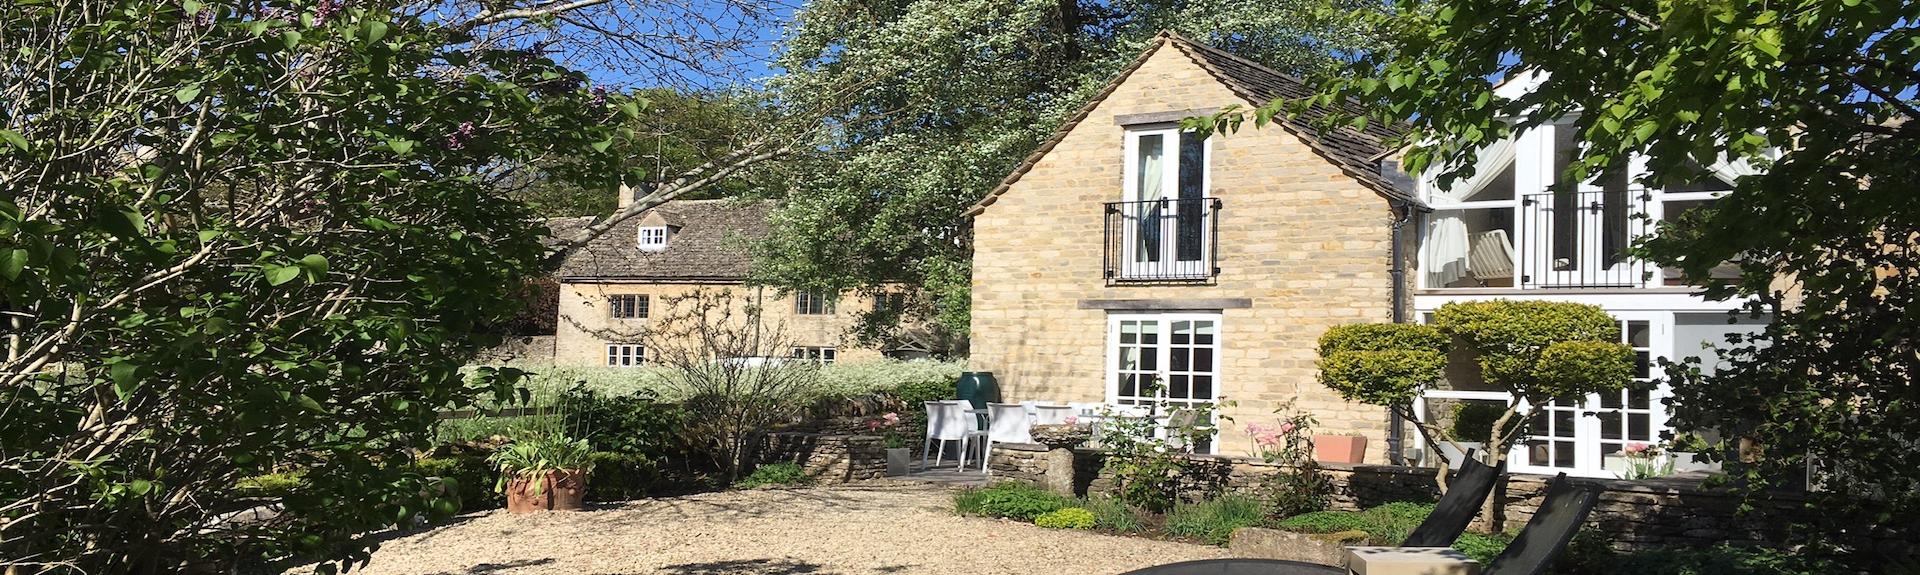 The Chestnuts - A Cotswold Eco-Chic Cottage